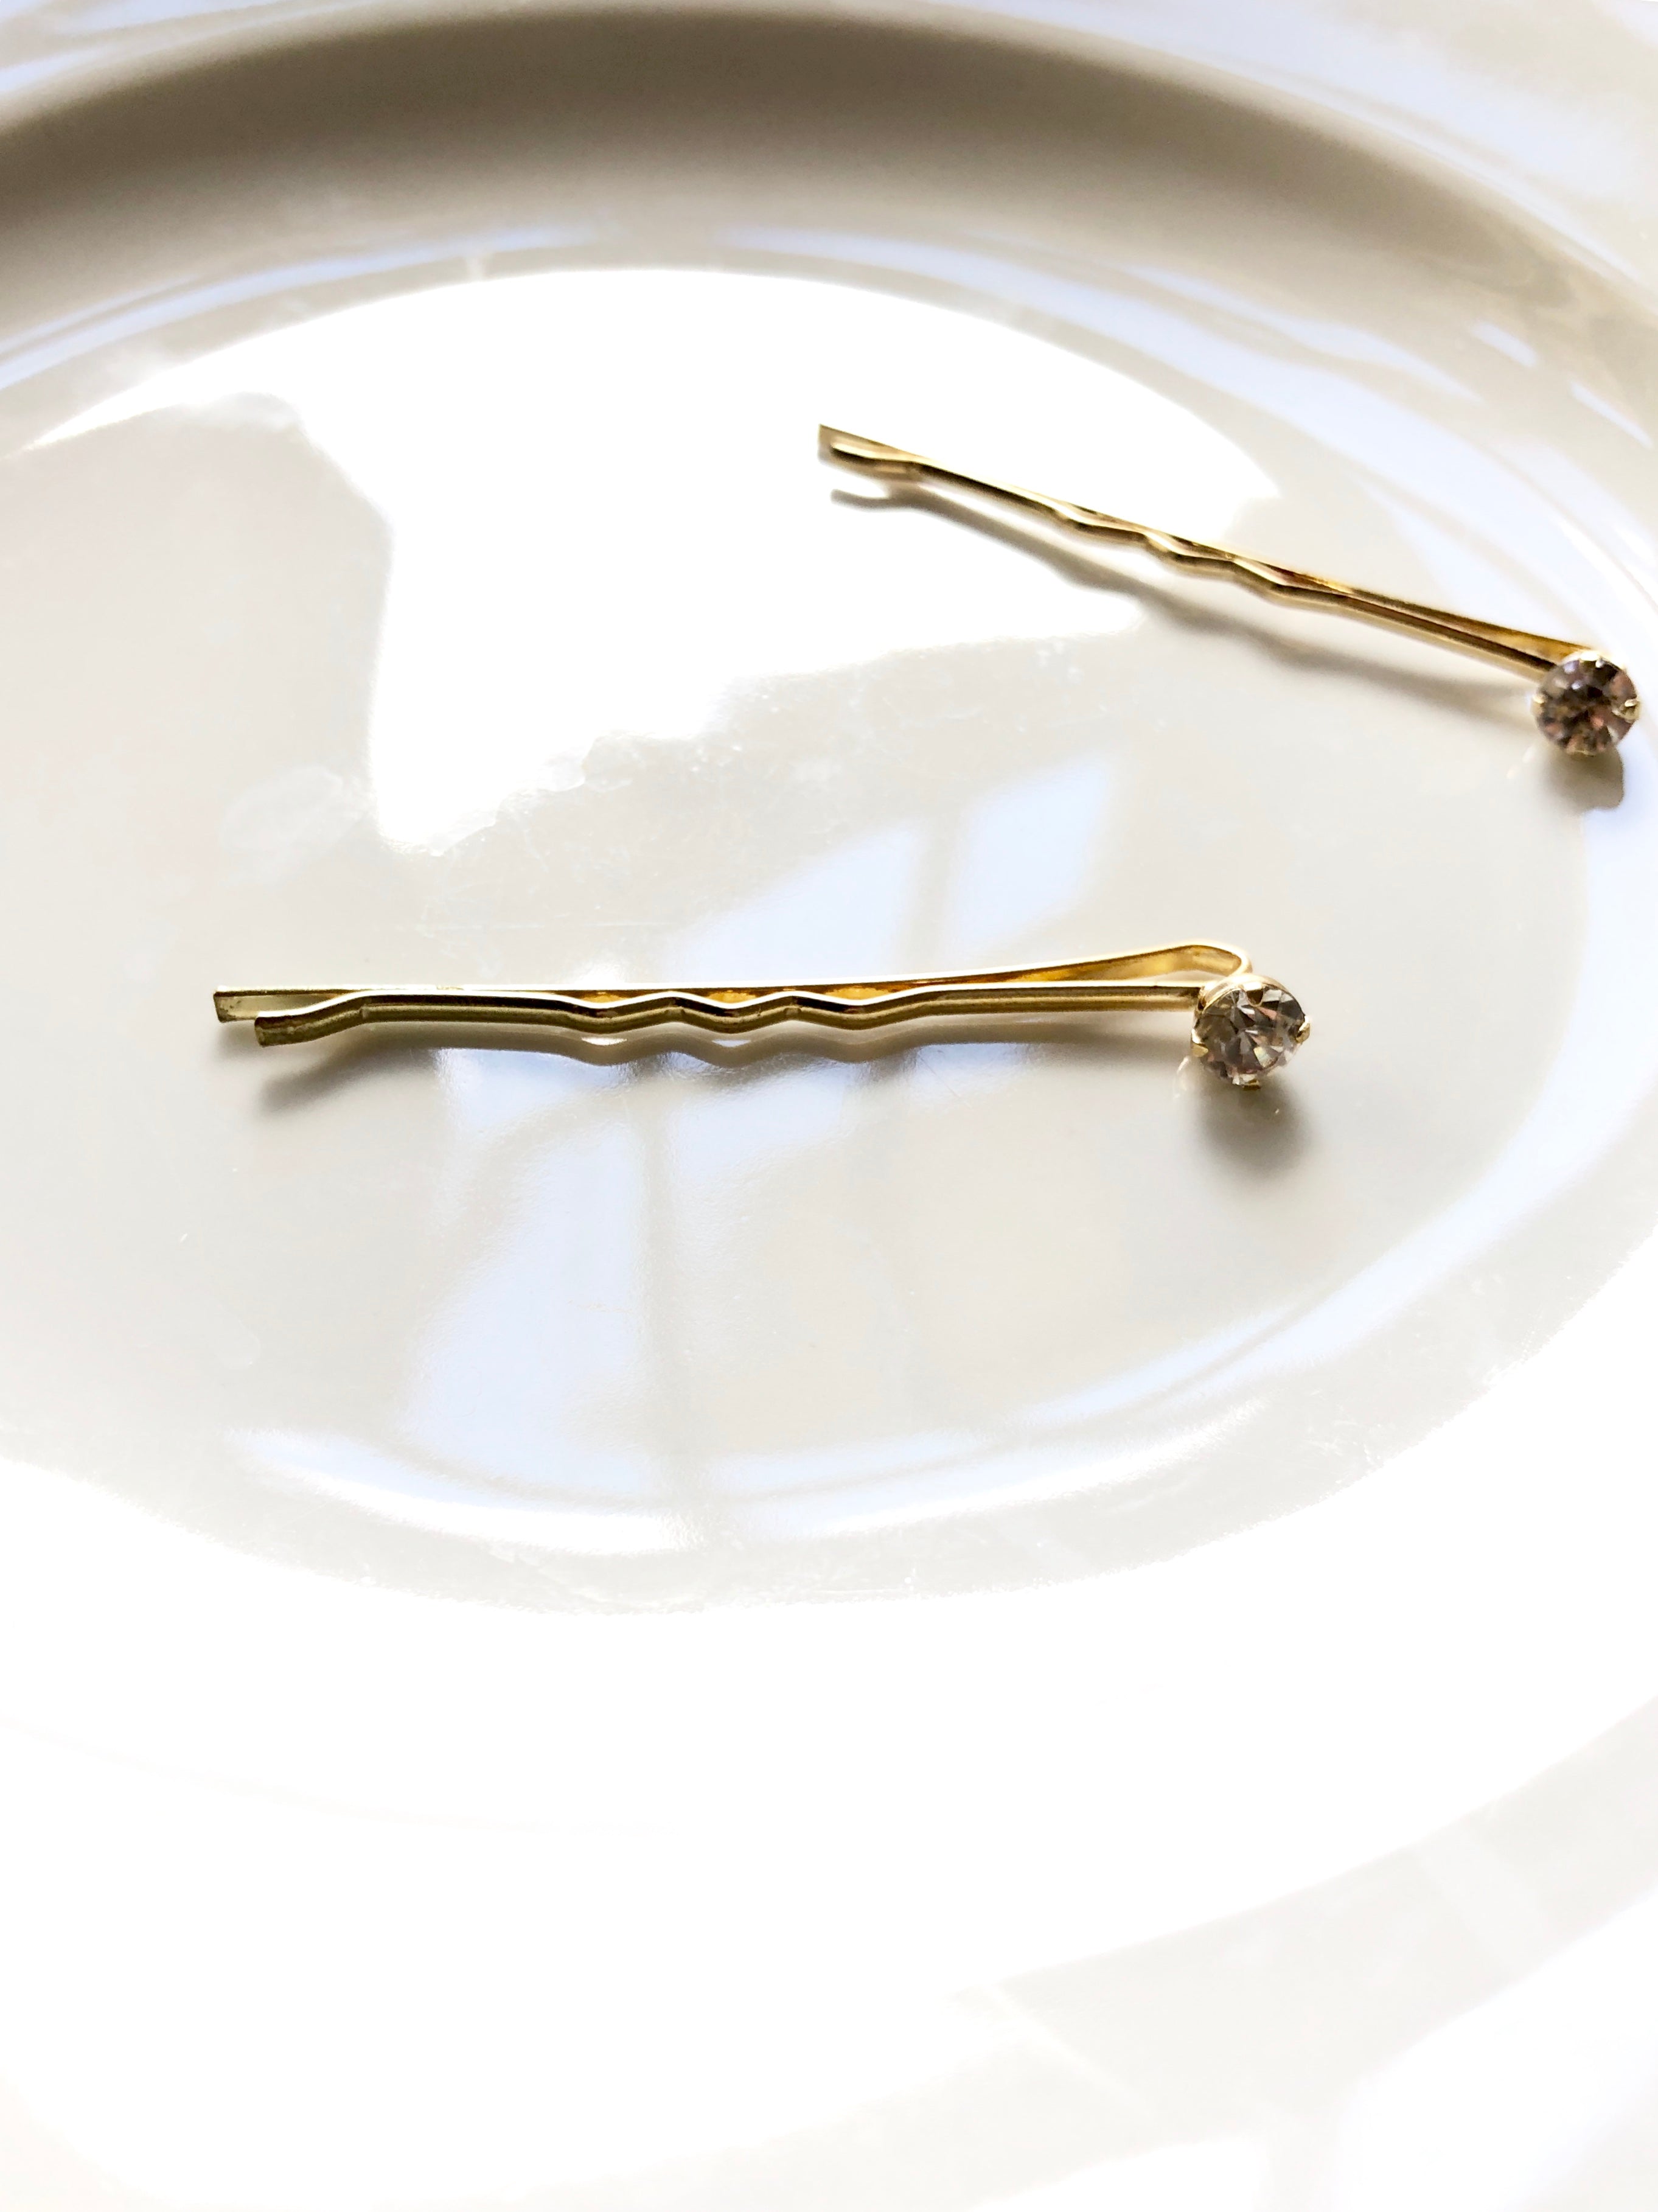 Sparkled Crystal 14k Gold Plated Bobby Pin